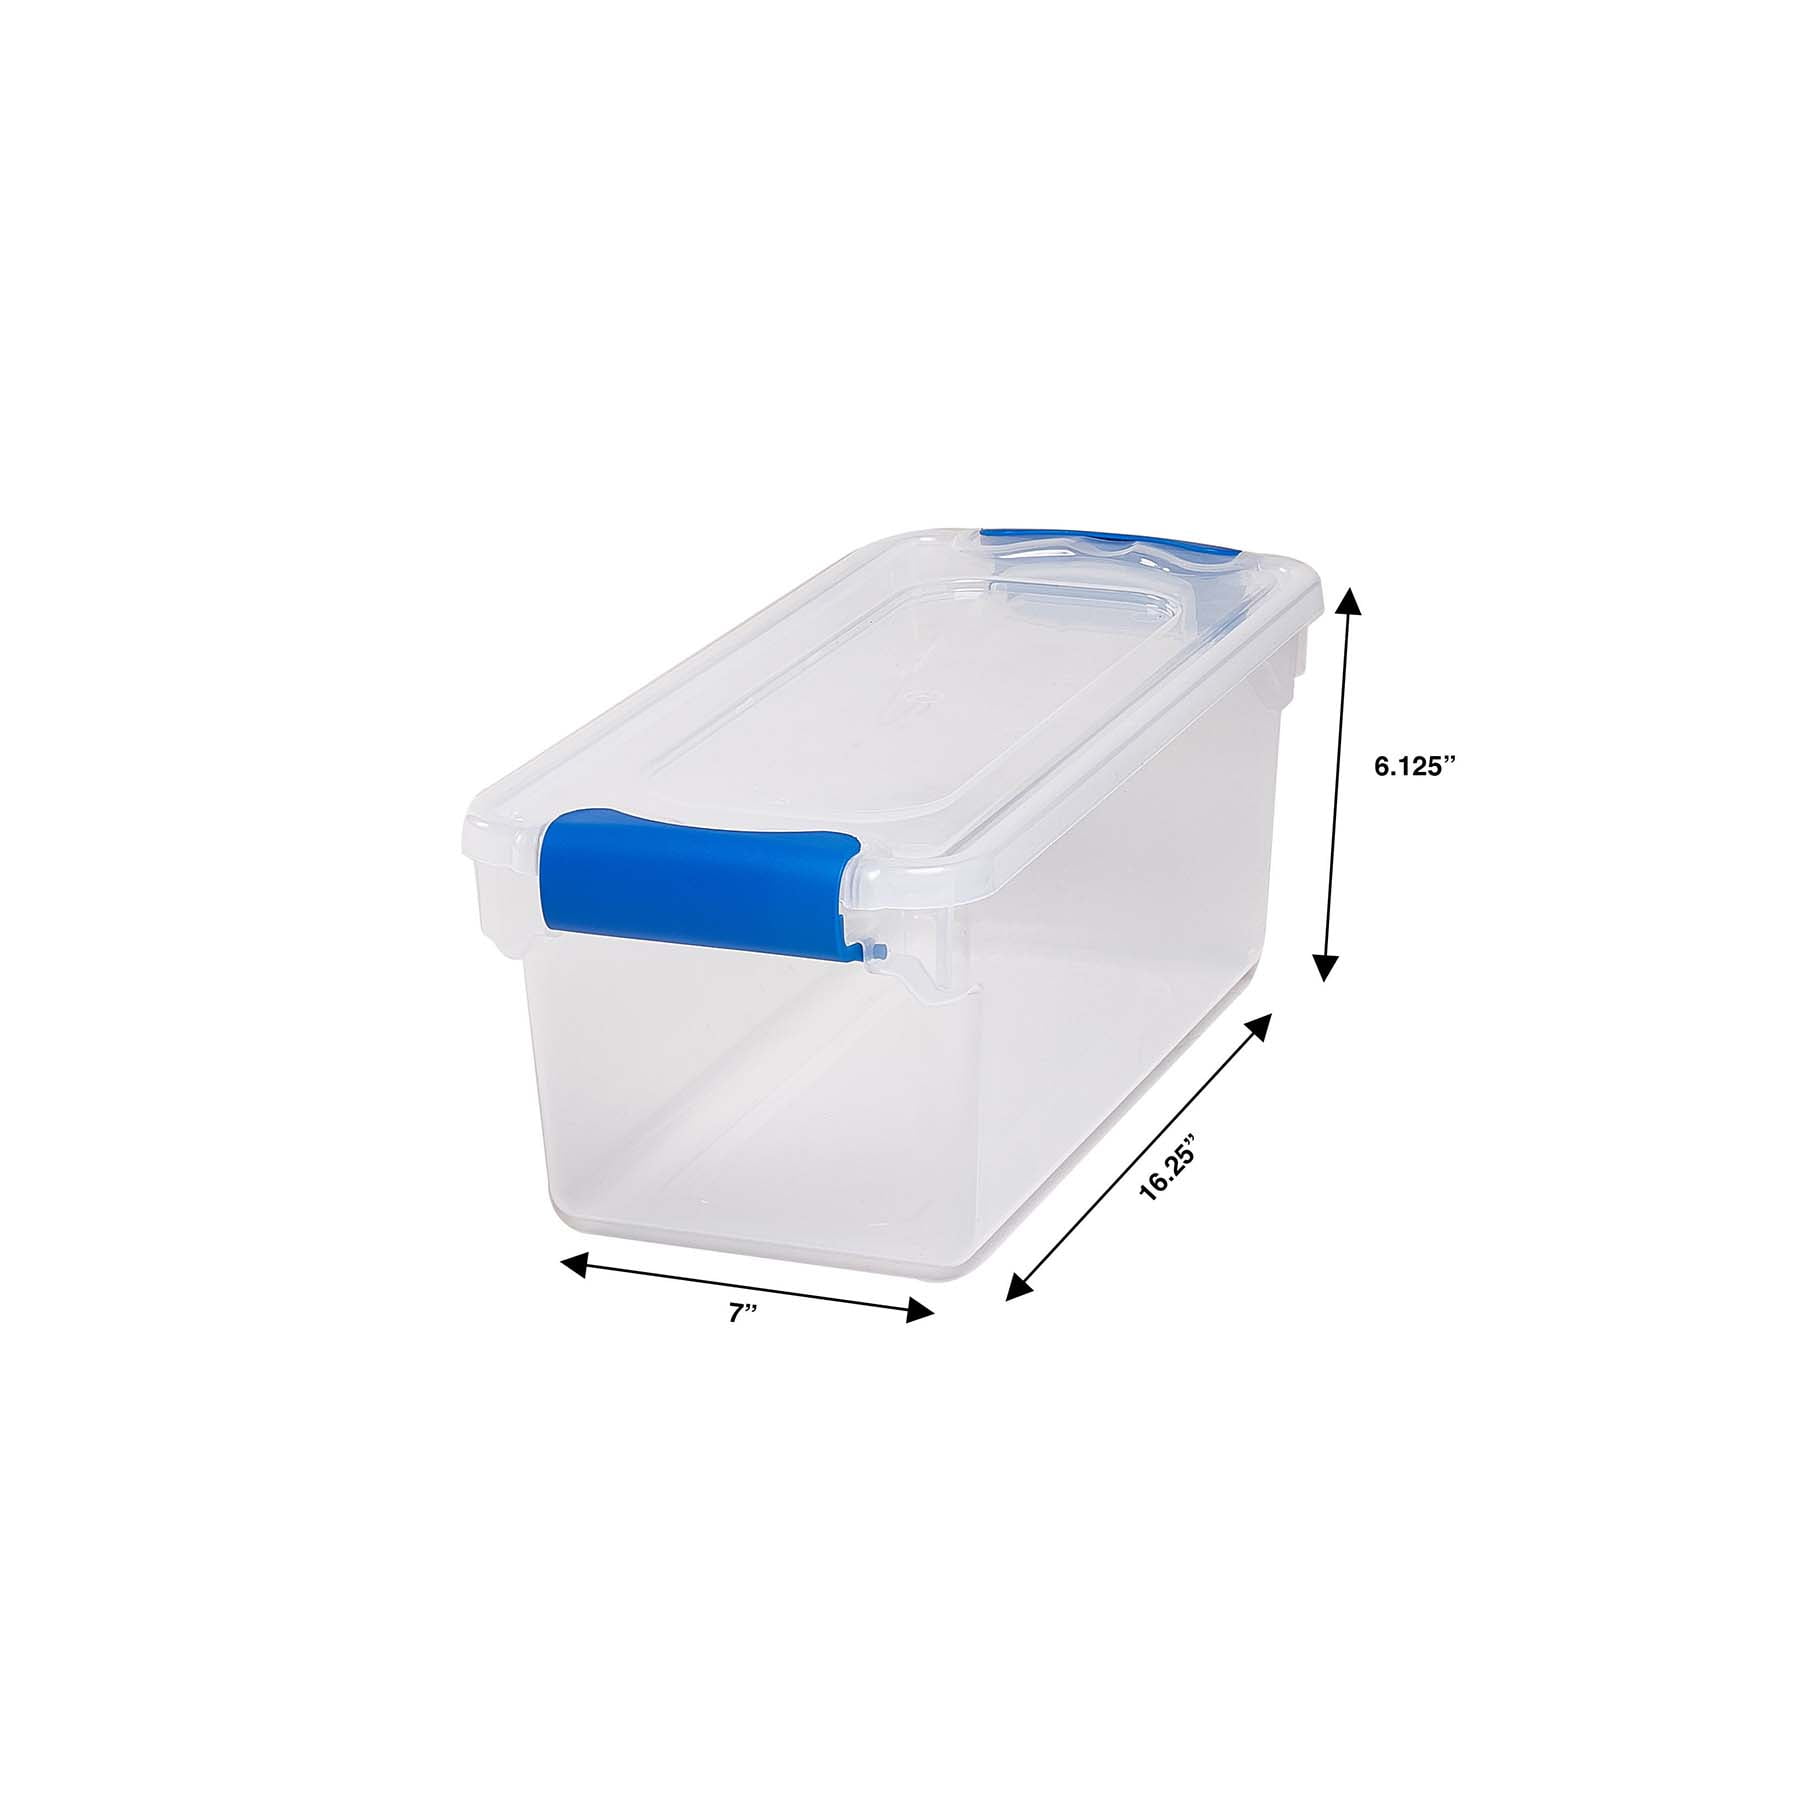 Hefty Plastic Storage Containers at